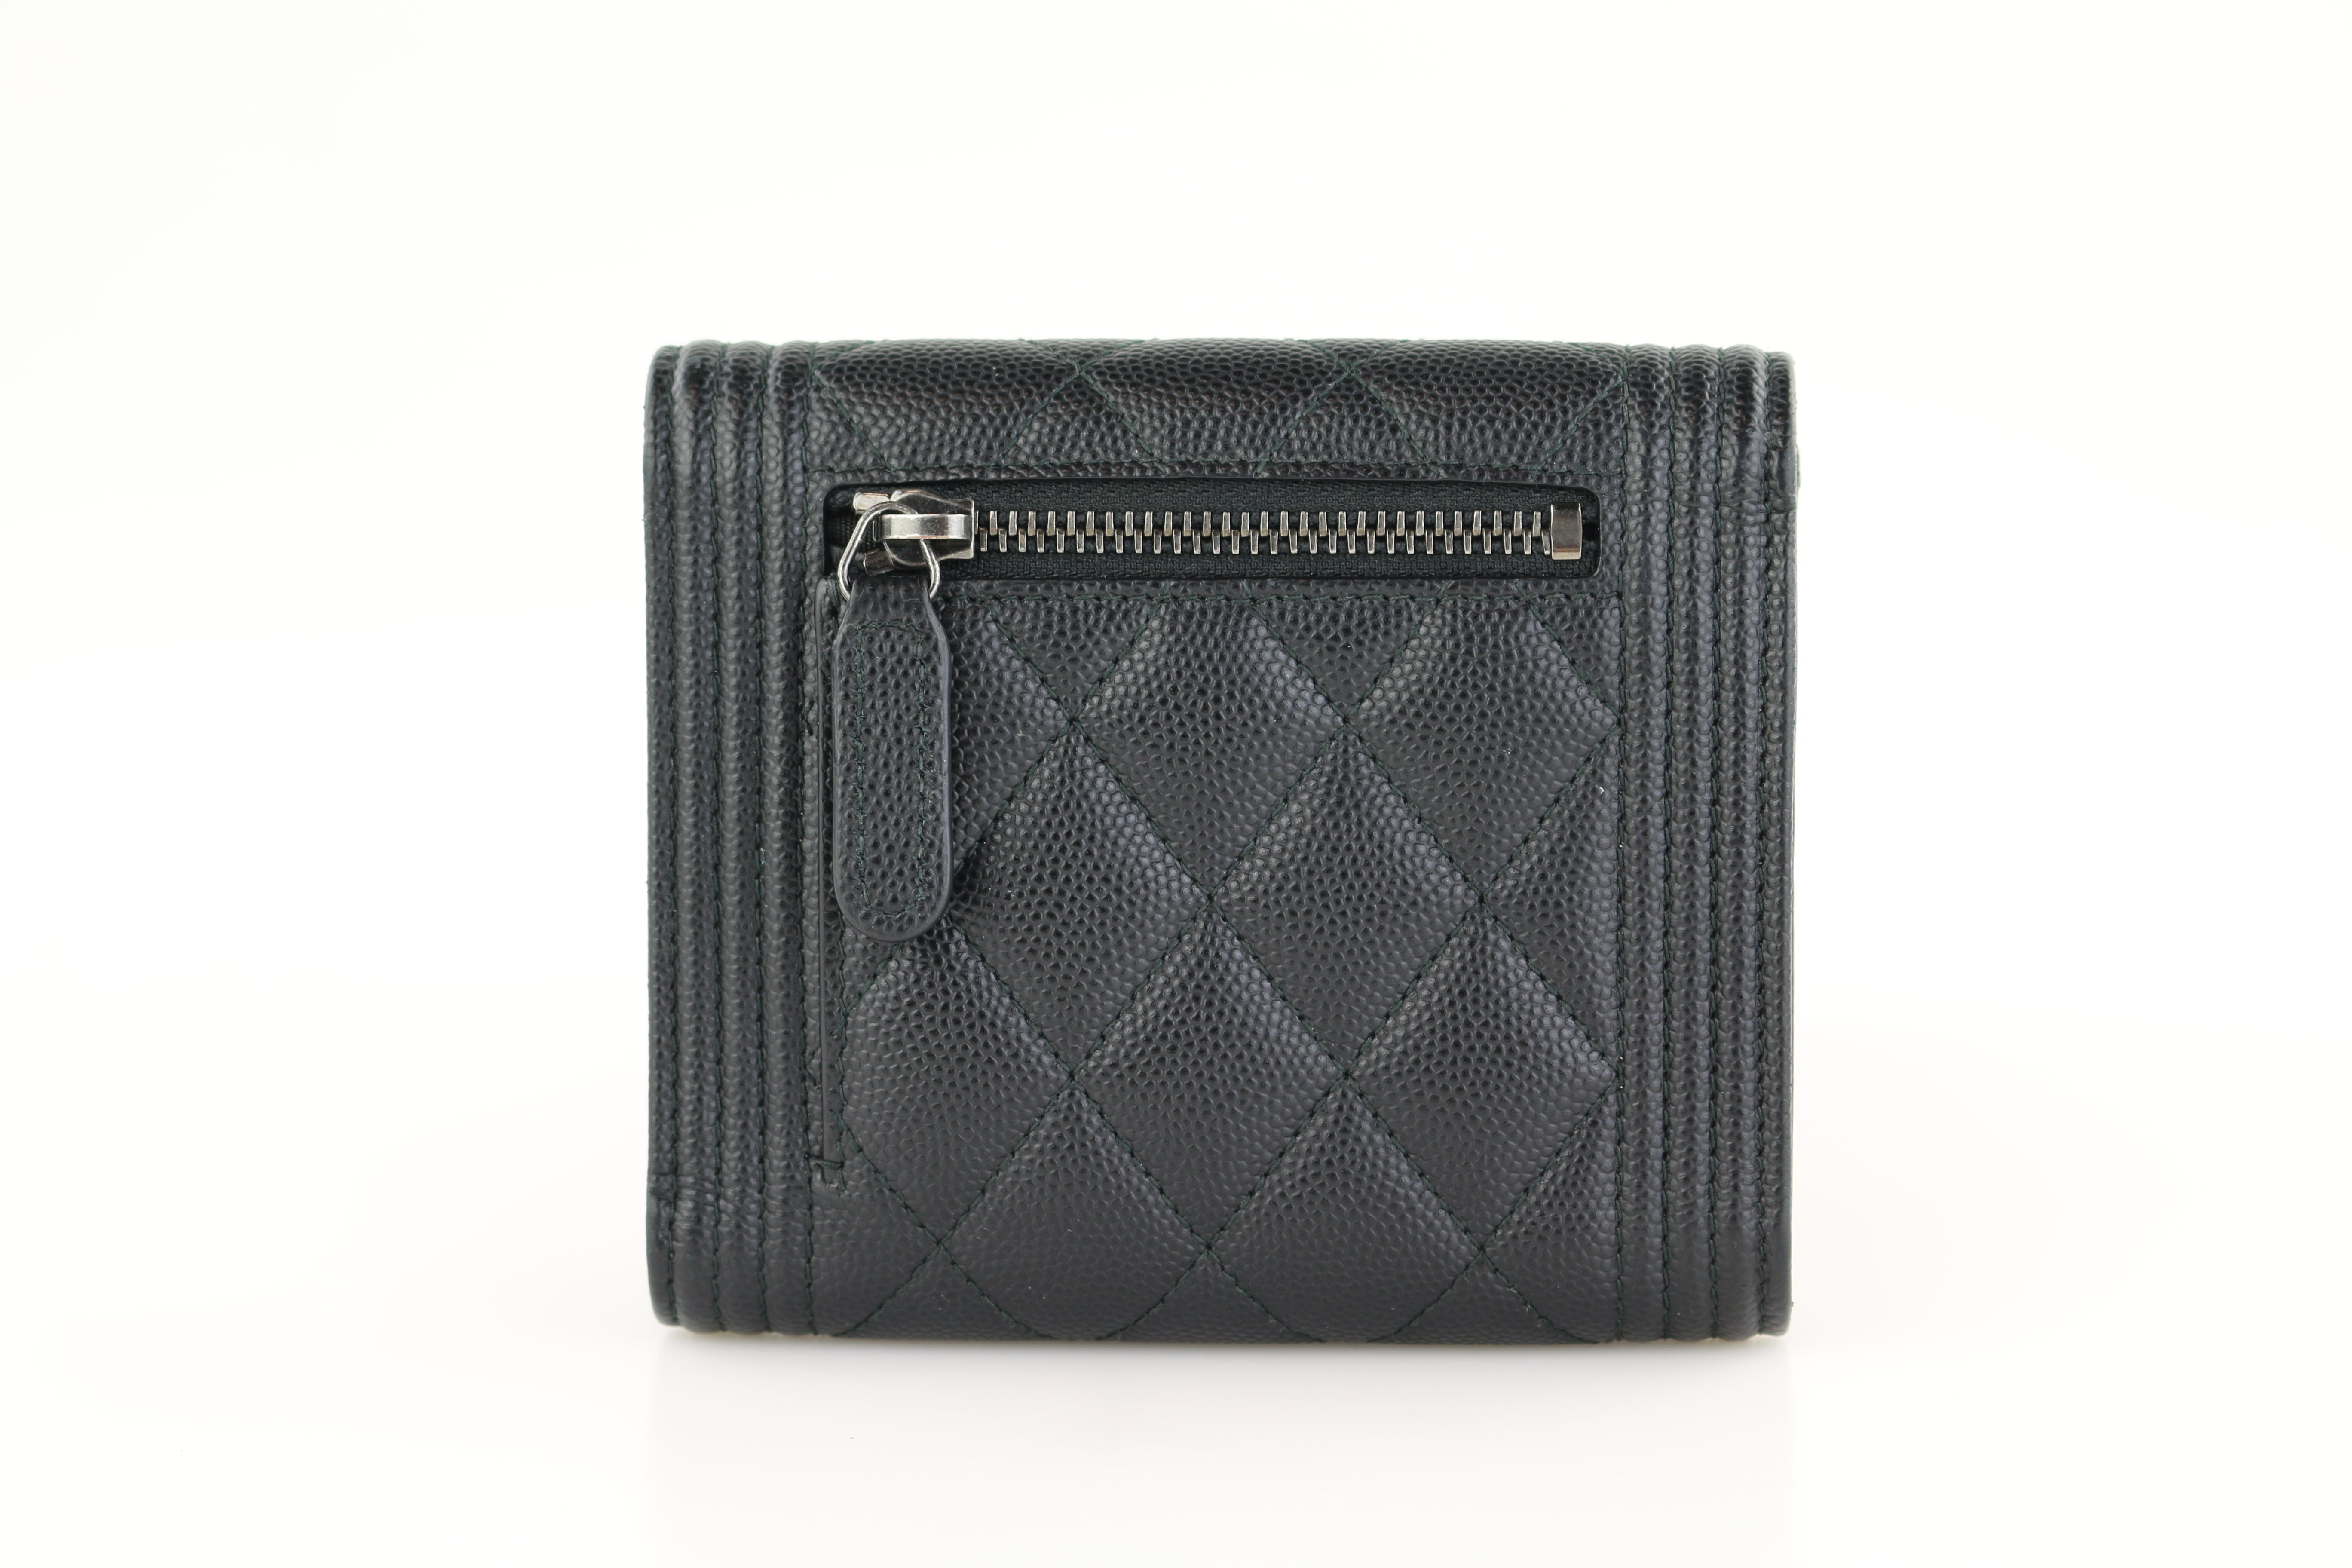 Chanel Pre-owned CC logo-embossed Compact Wallet - Black